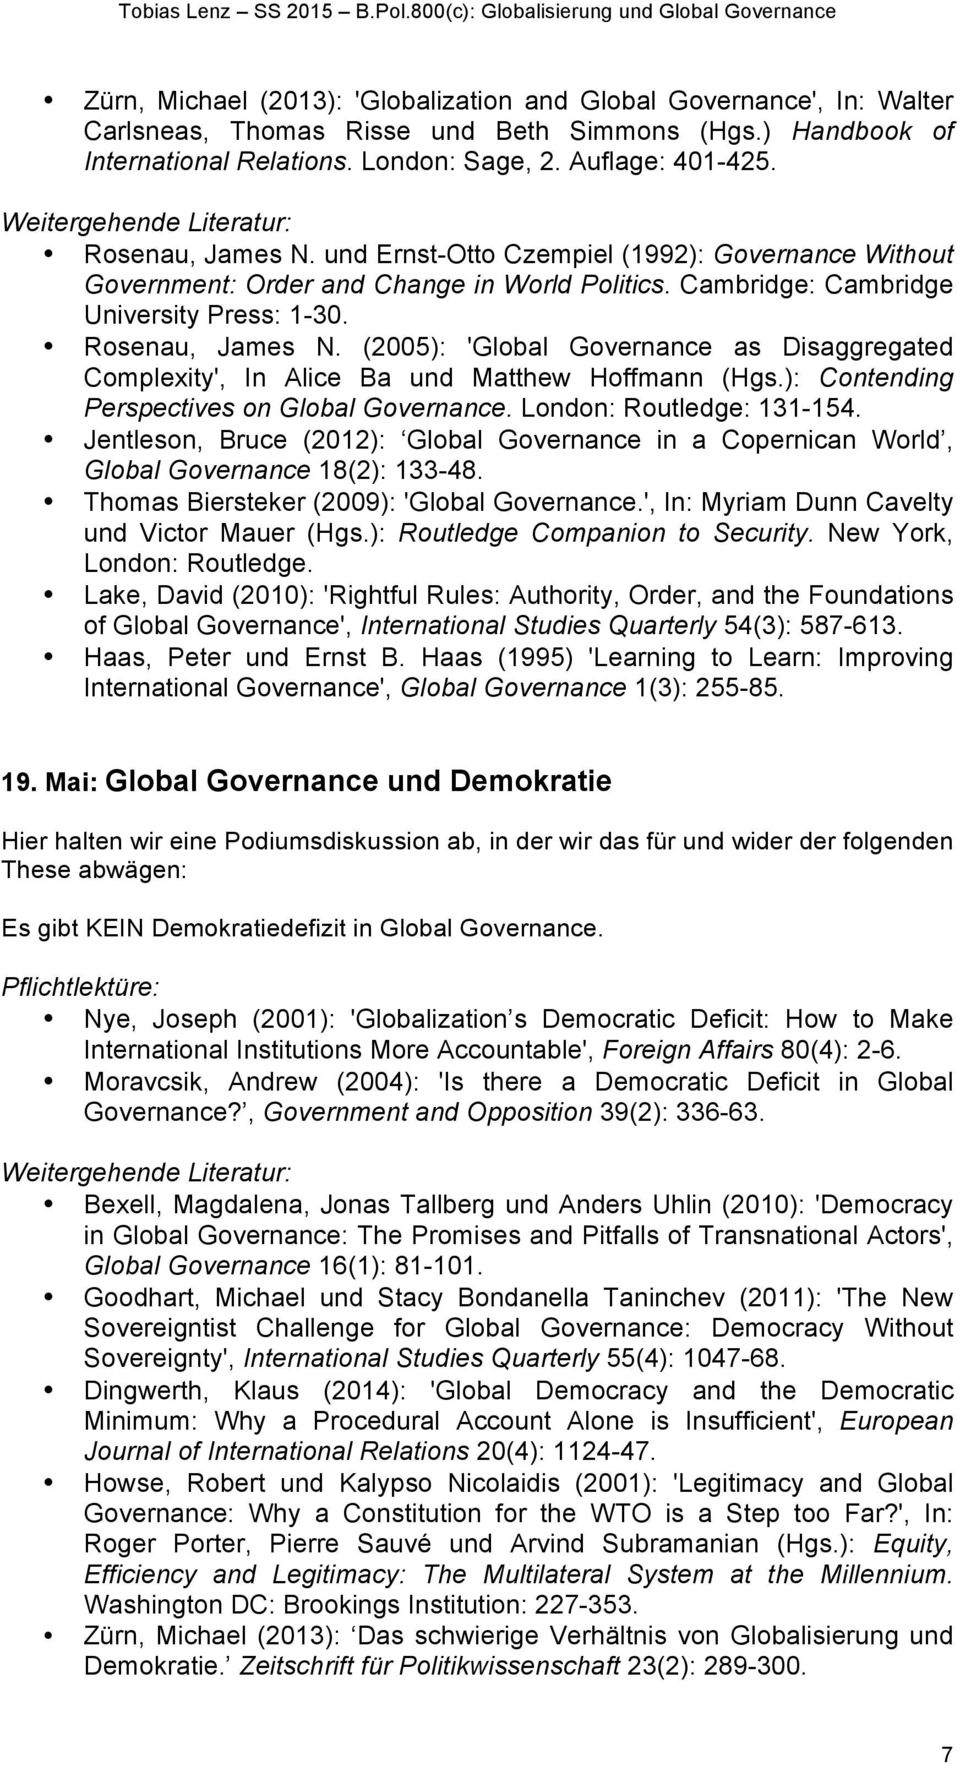 (2005): 'Global Governance as Disaggregated Complexity', In Alice Ba und Matthew Hoffmann (Hgs.): Contending Perspectives on Global Governance. London: Routledge: 131-154.